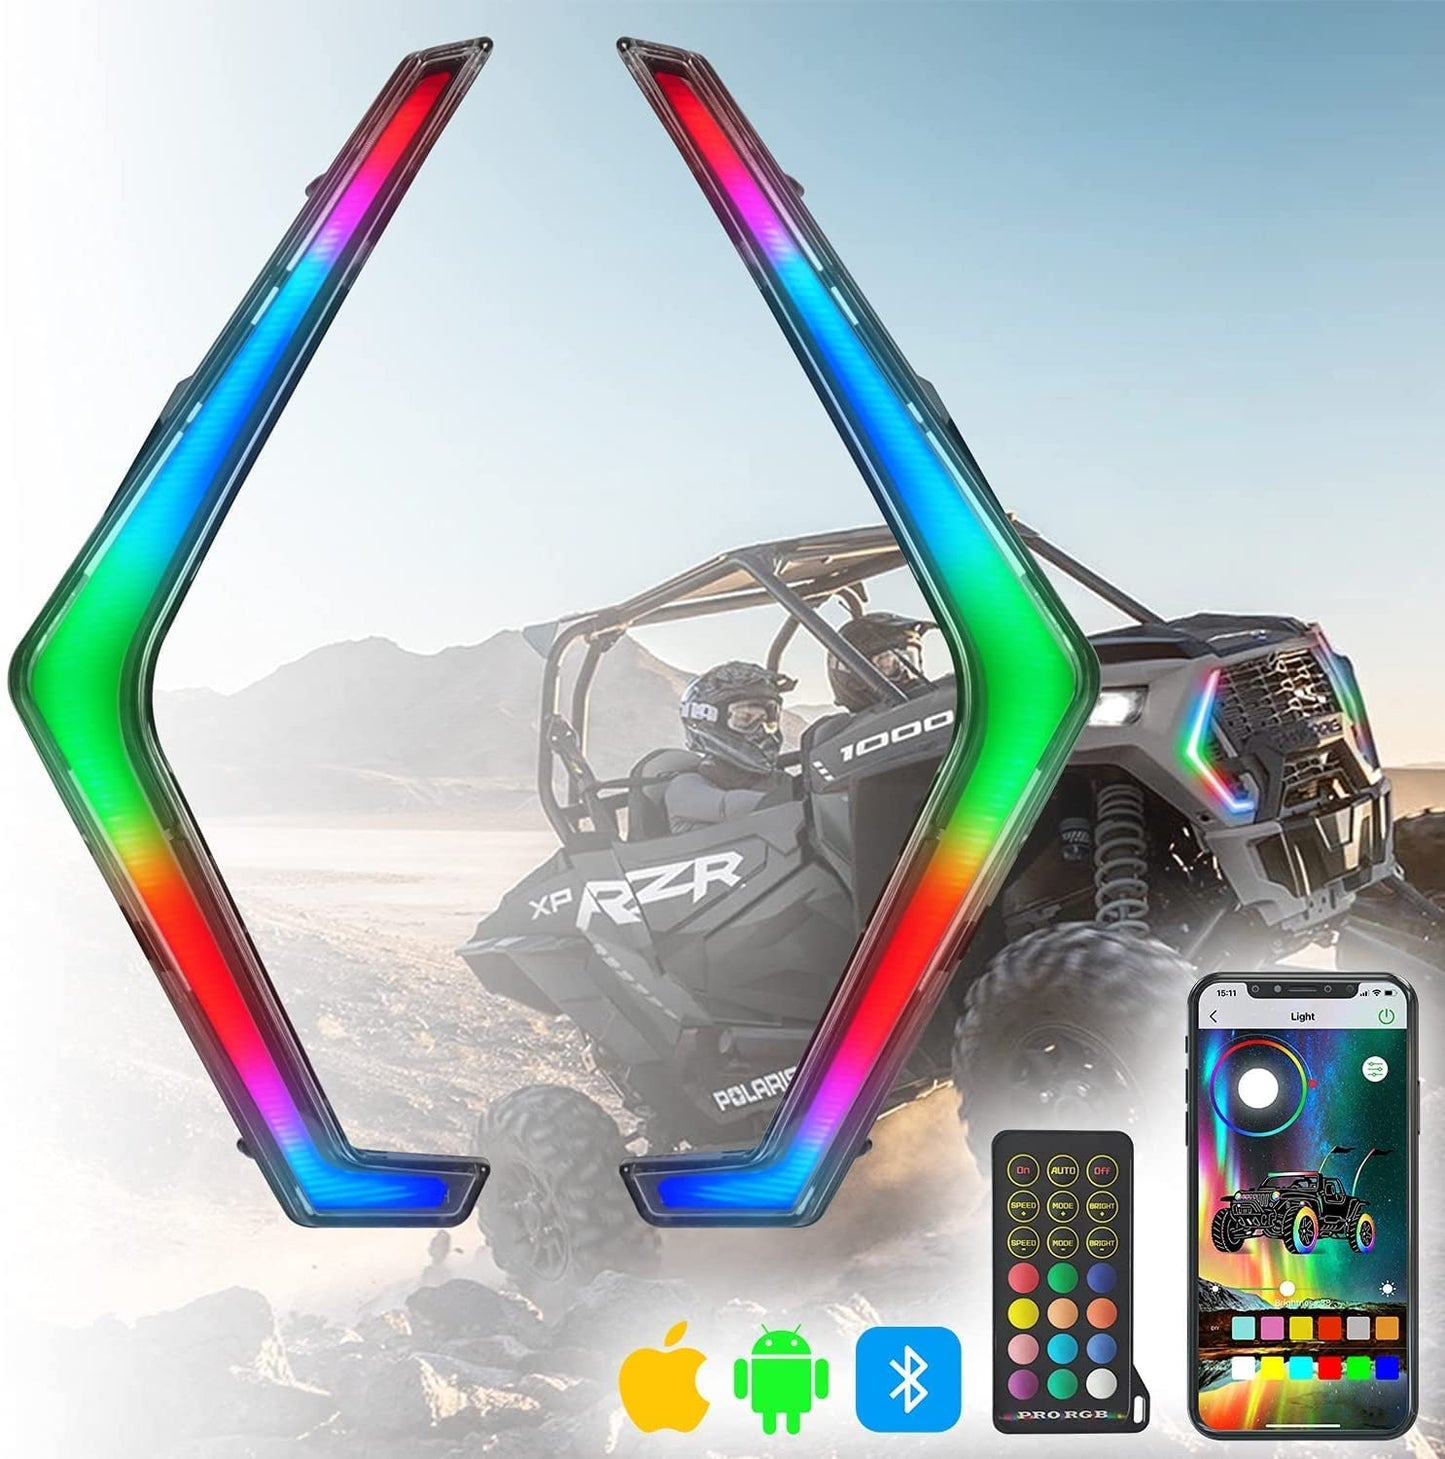 Polaris RZR RGB Turn Signal Fang Light,Bluetooth and Remote Control Spiral RGB Chase Light Compatible for 2019 2020 2021 Polaris RZR XP 1000 Turbo